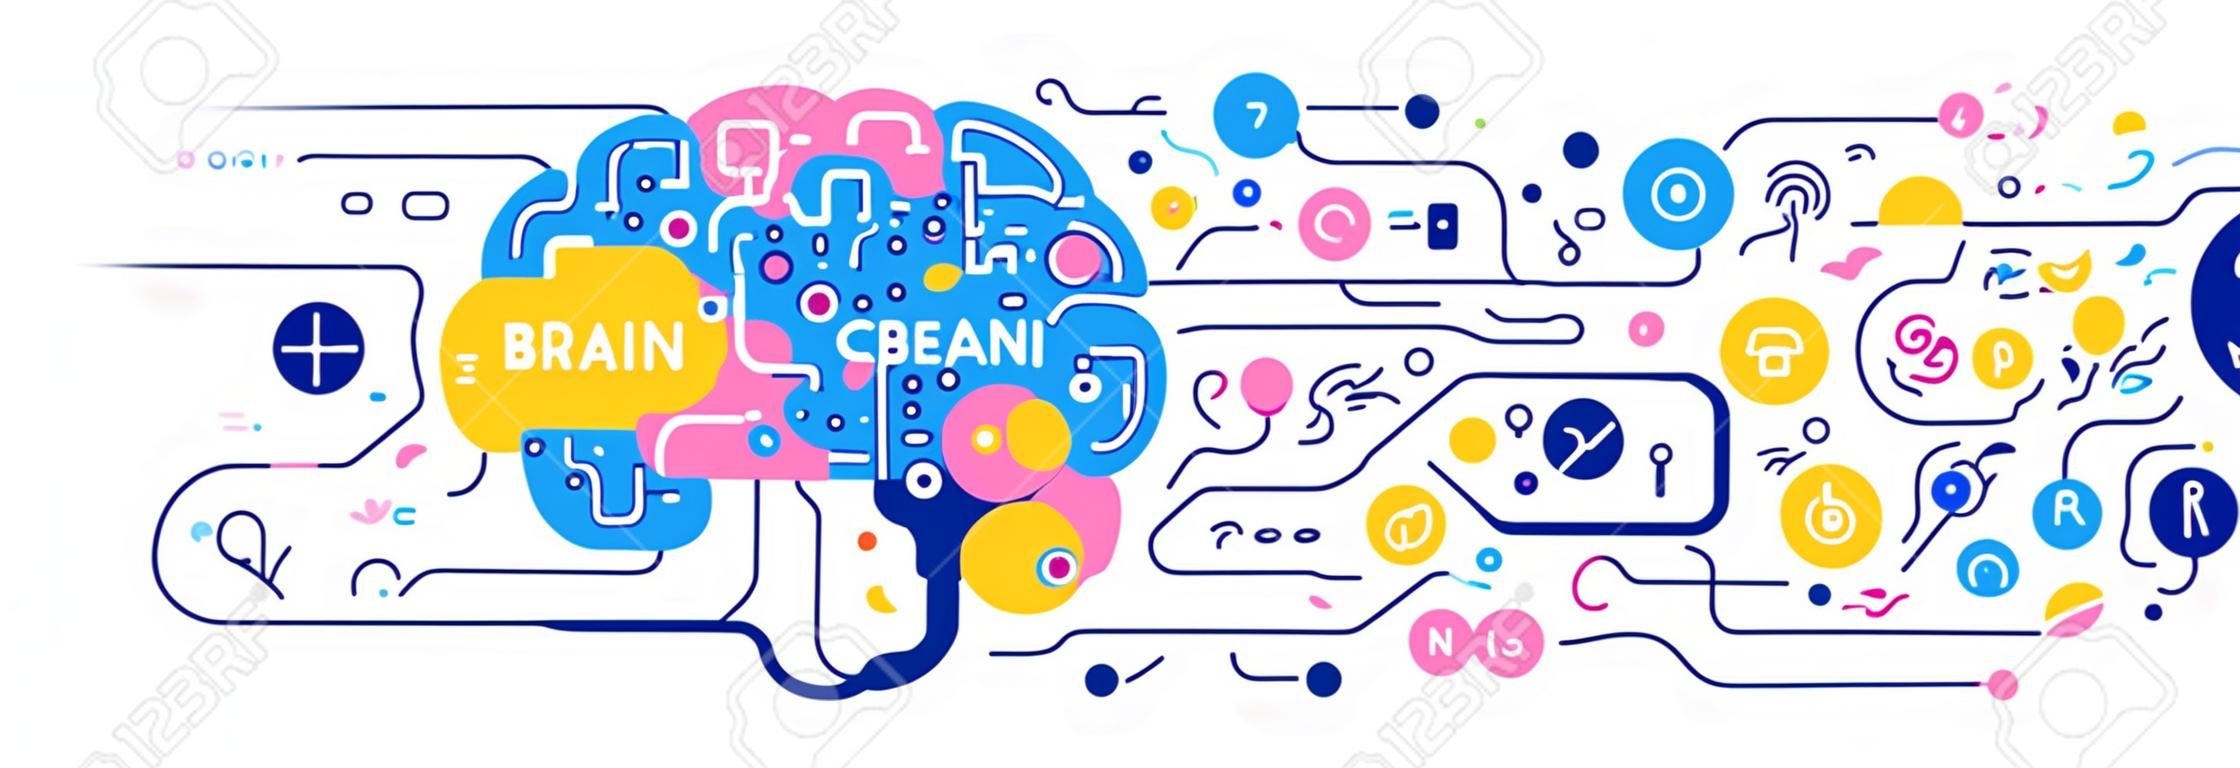 Vector creative illustration of human brain with icon and tag word on white background. Left and right cerebral hemisphere creative and analytical. Flat line art style brain design for education banner, print